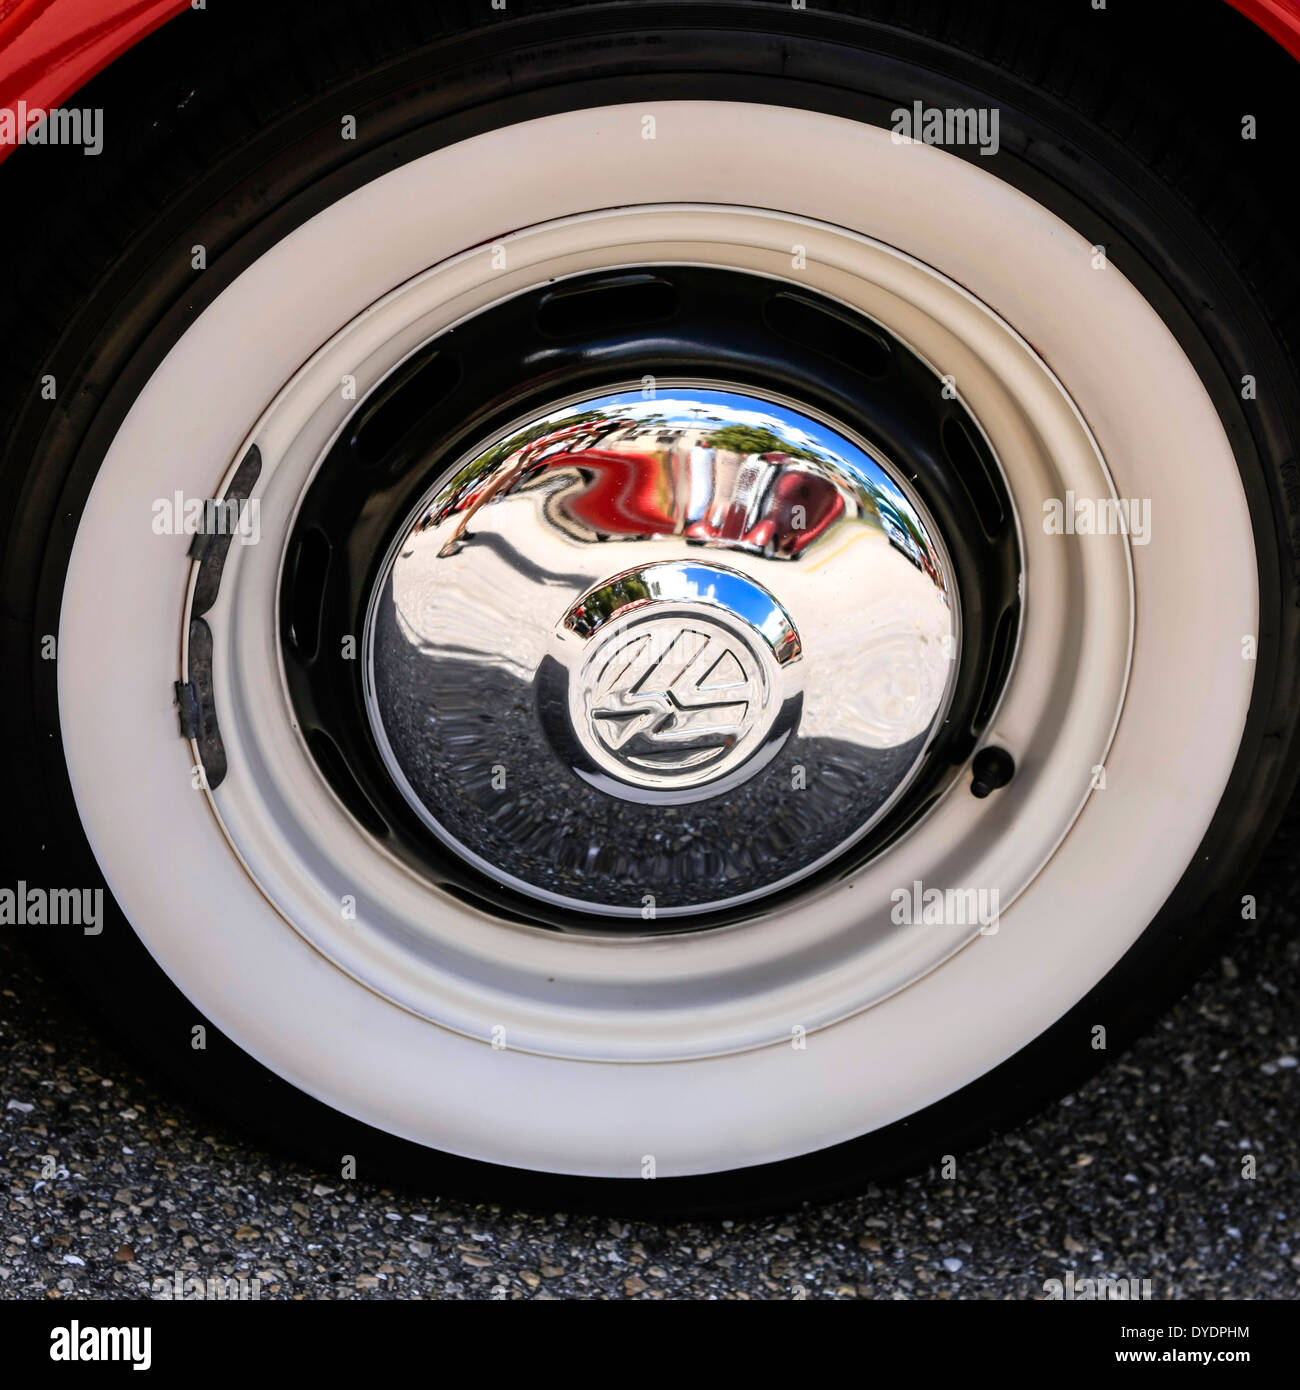 1959 Volkswagen Super Beetle 1300 white wall tire and hub cap Stock Photo